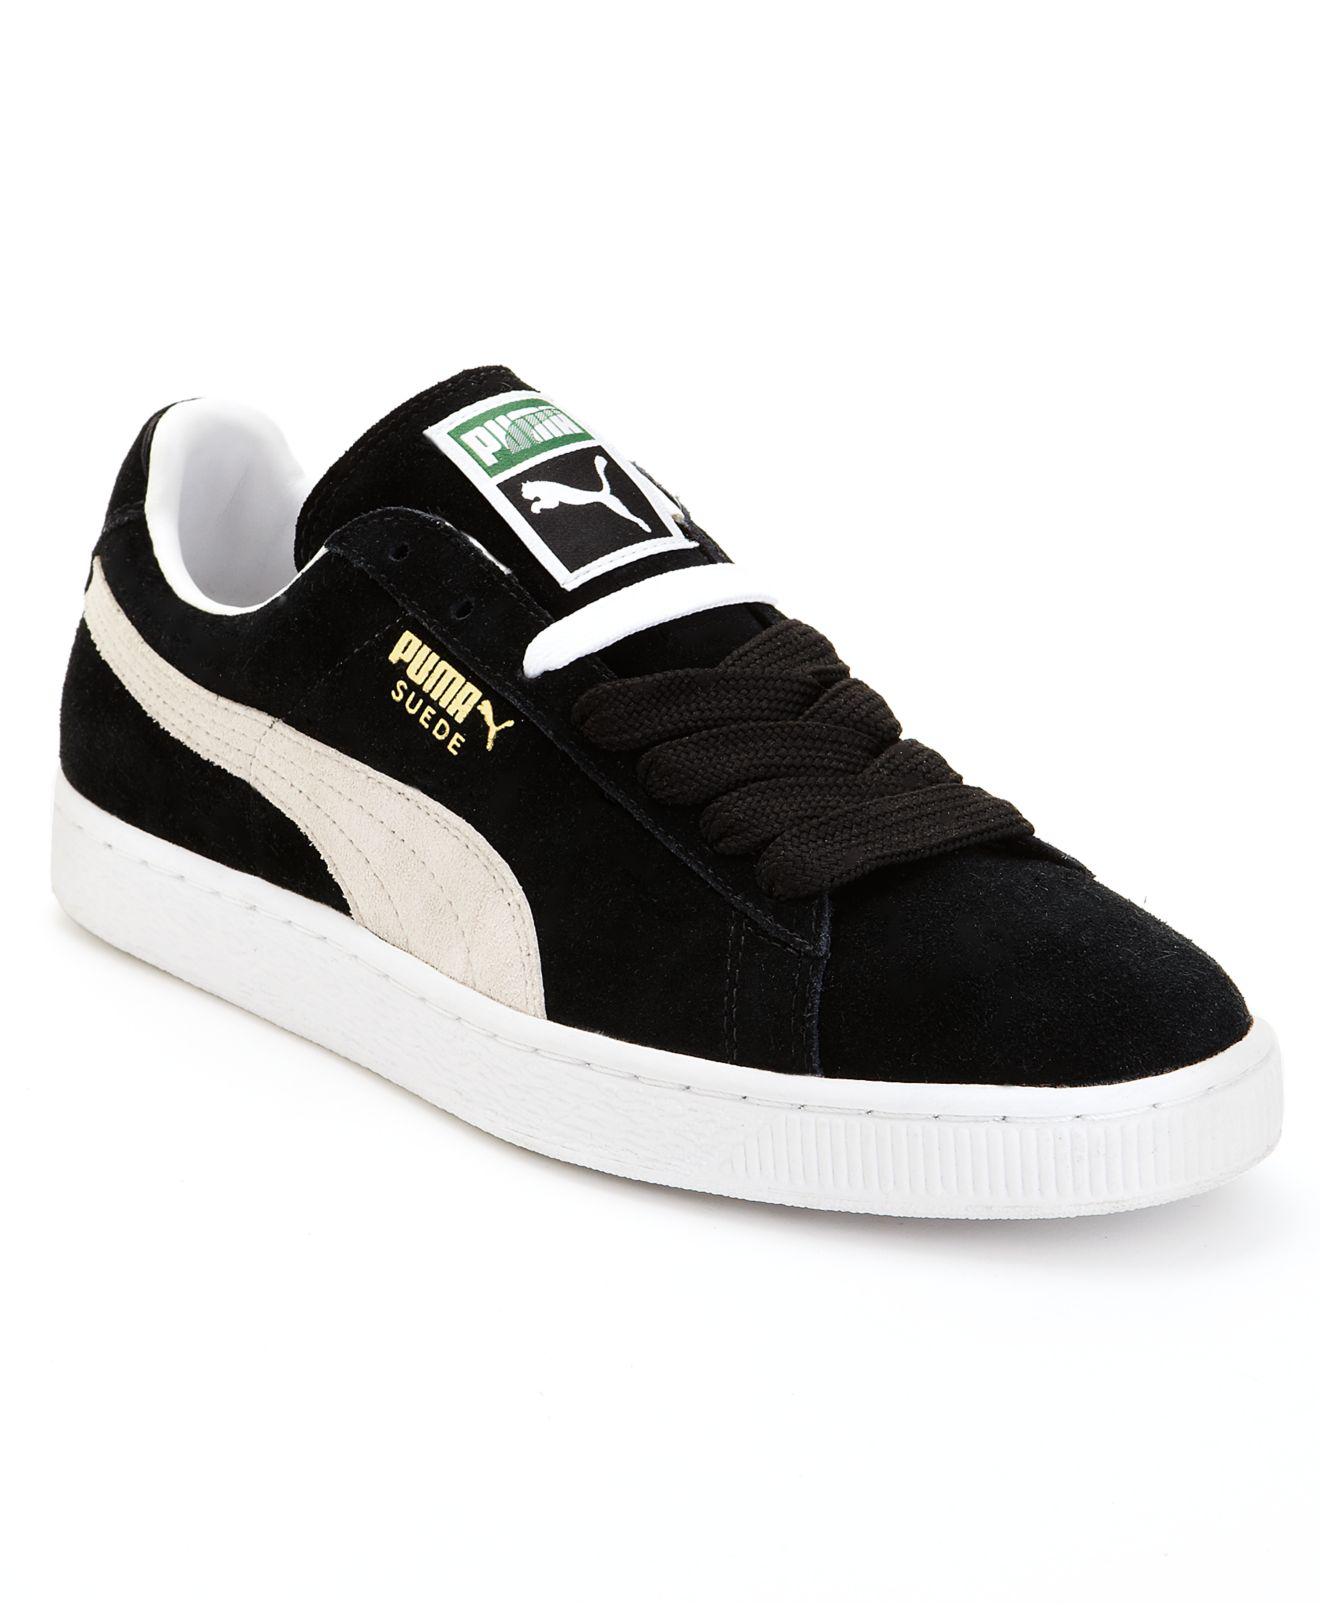 Lyst - Puma Men's Suede Classic+ Sneakers From Finish Line in Black for Men